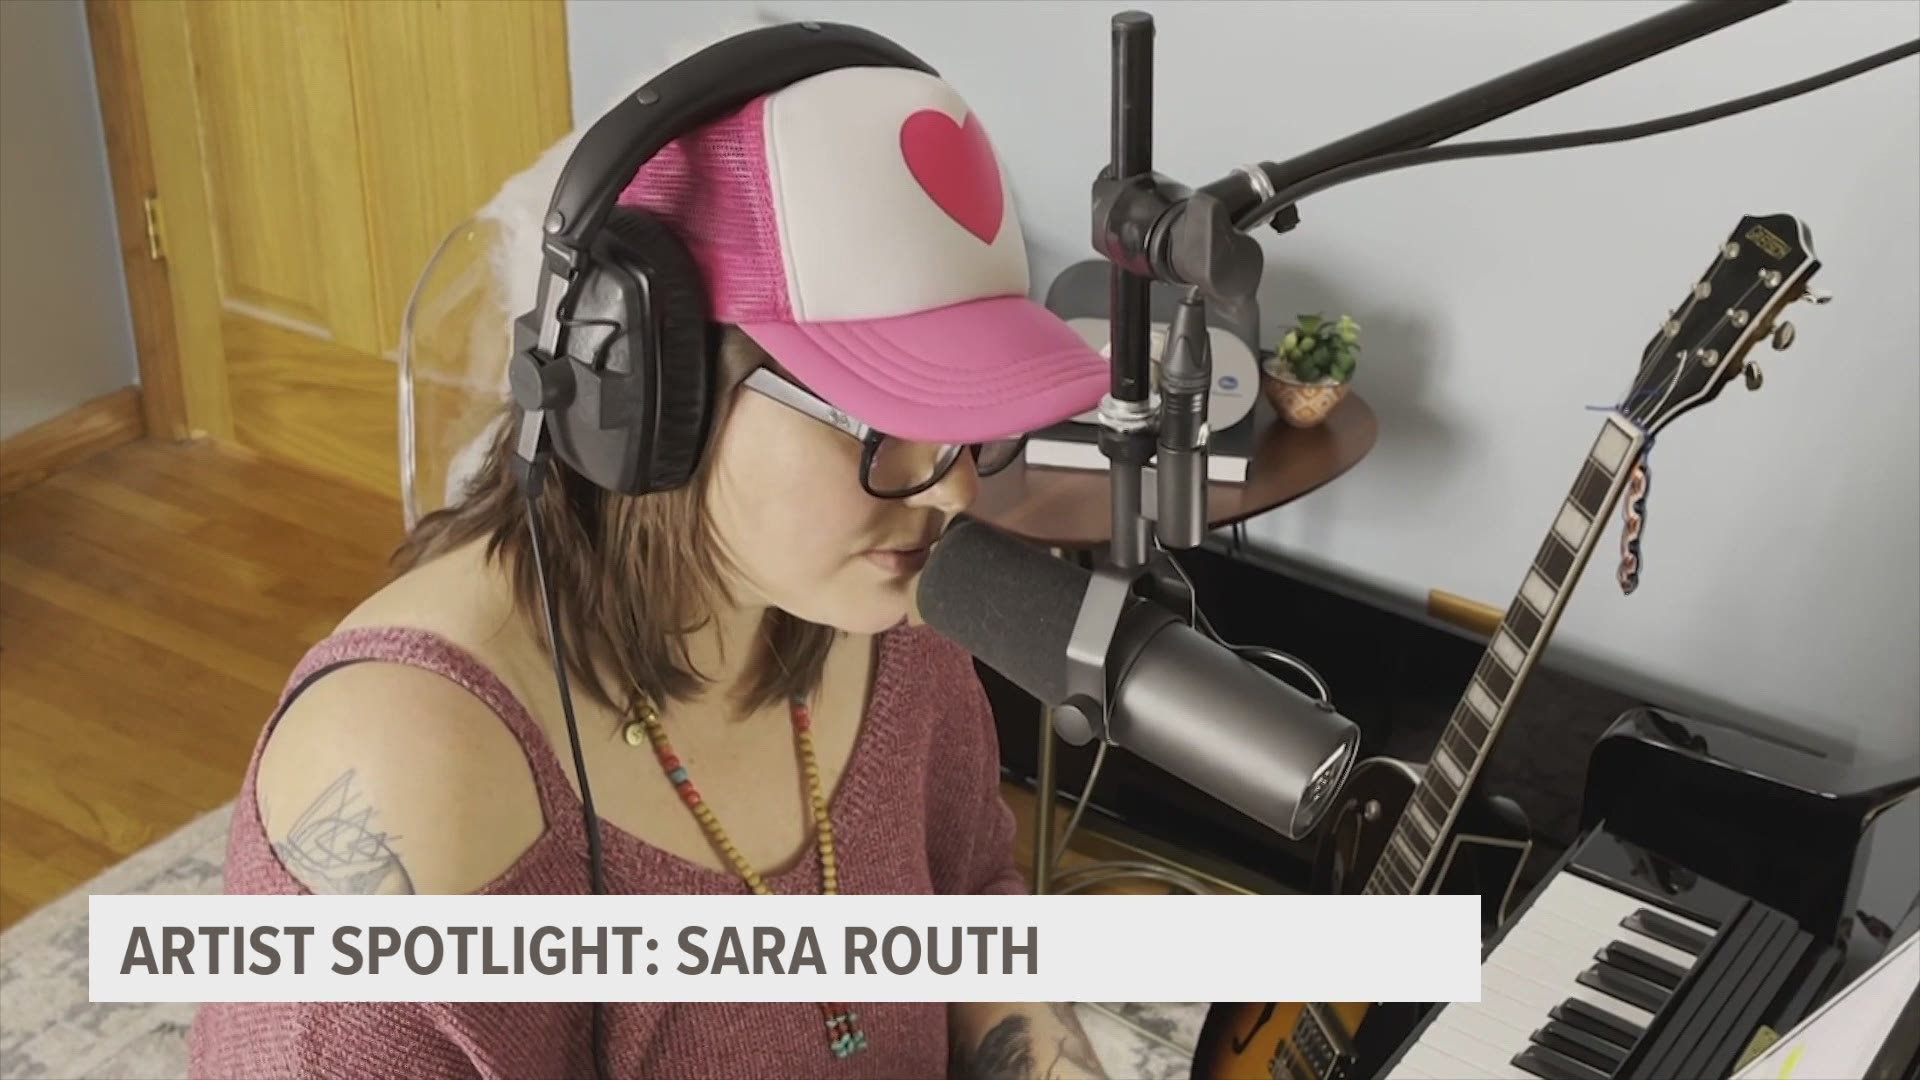 Des Moines musician Sara Routh debuts her new song "By the Way," part of her upcoming album. You can support Sara by visiting her website, sararouth.com.